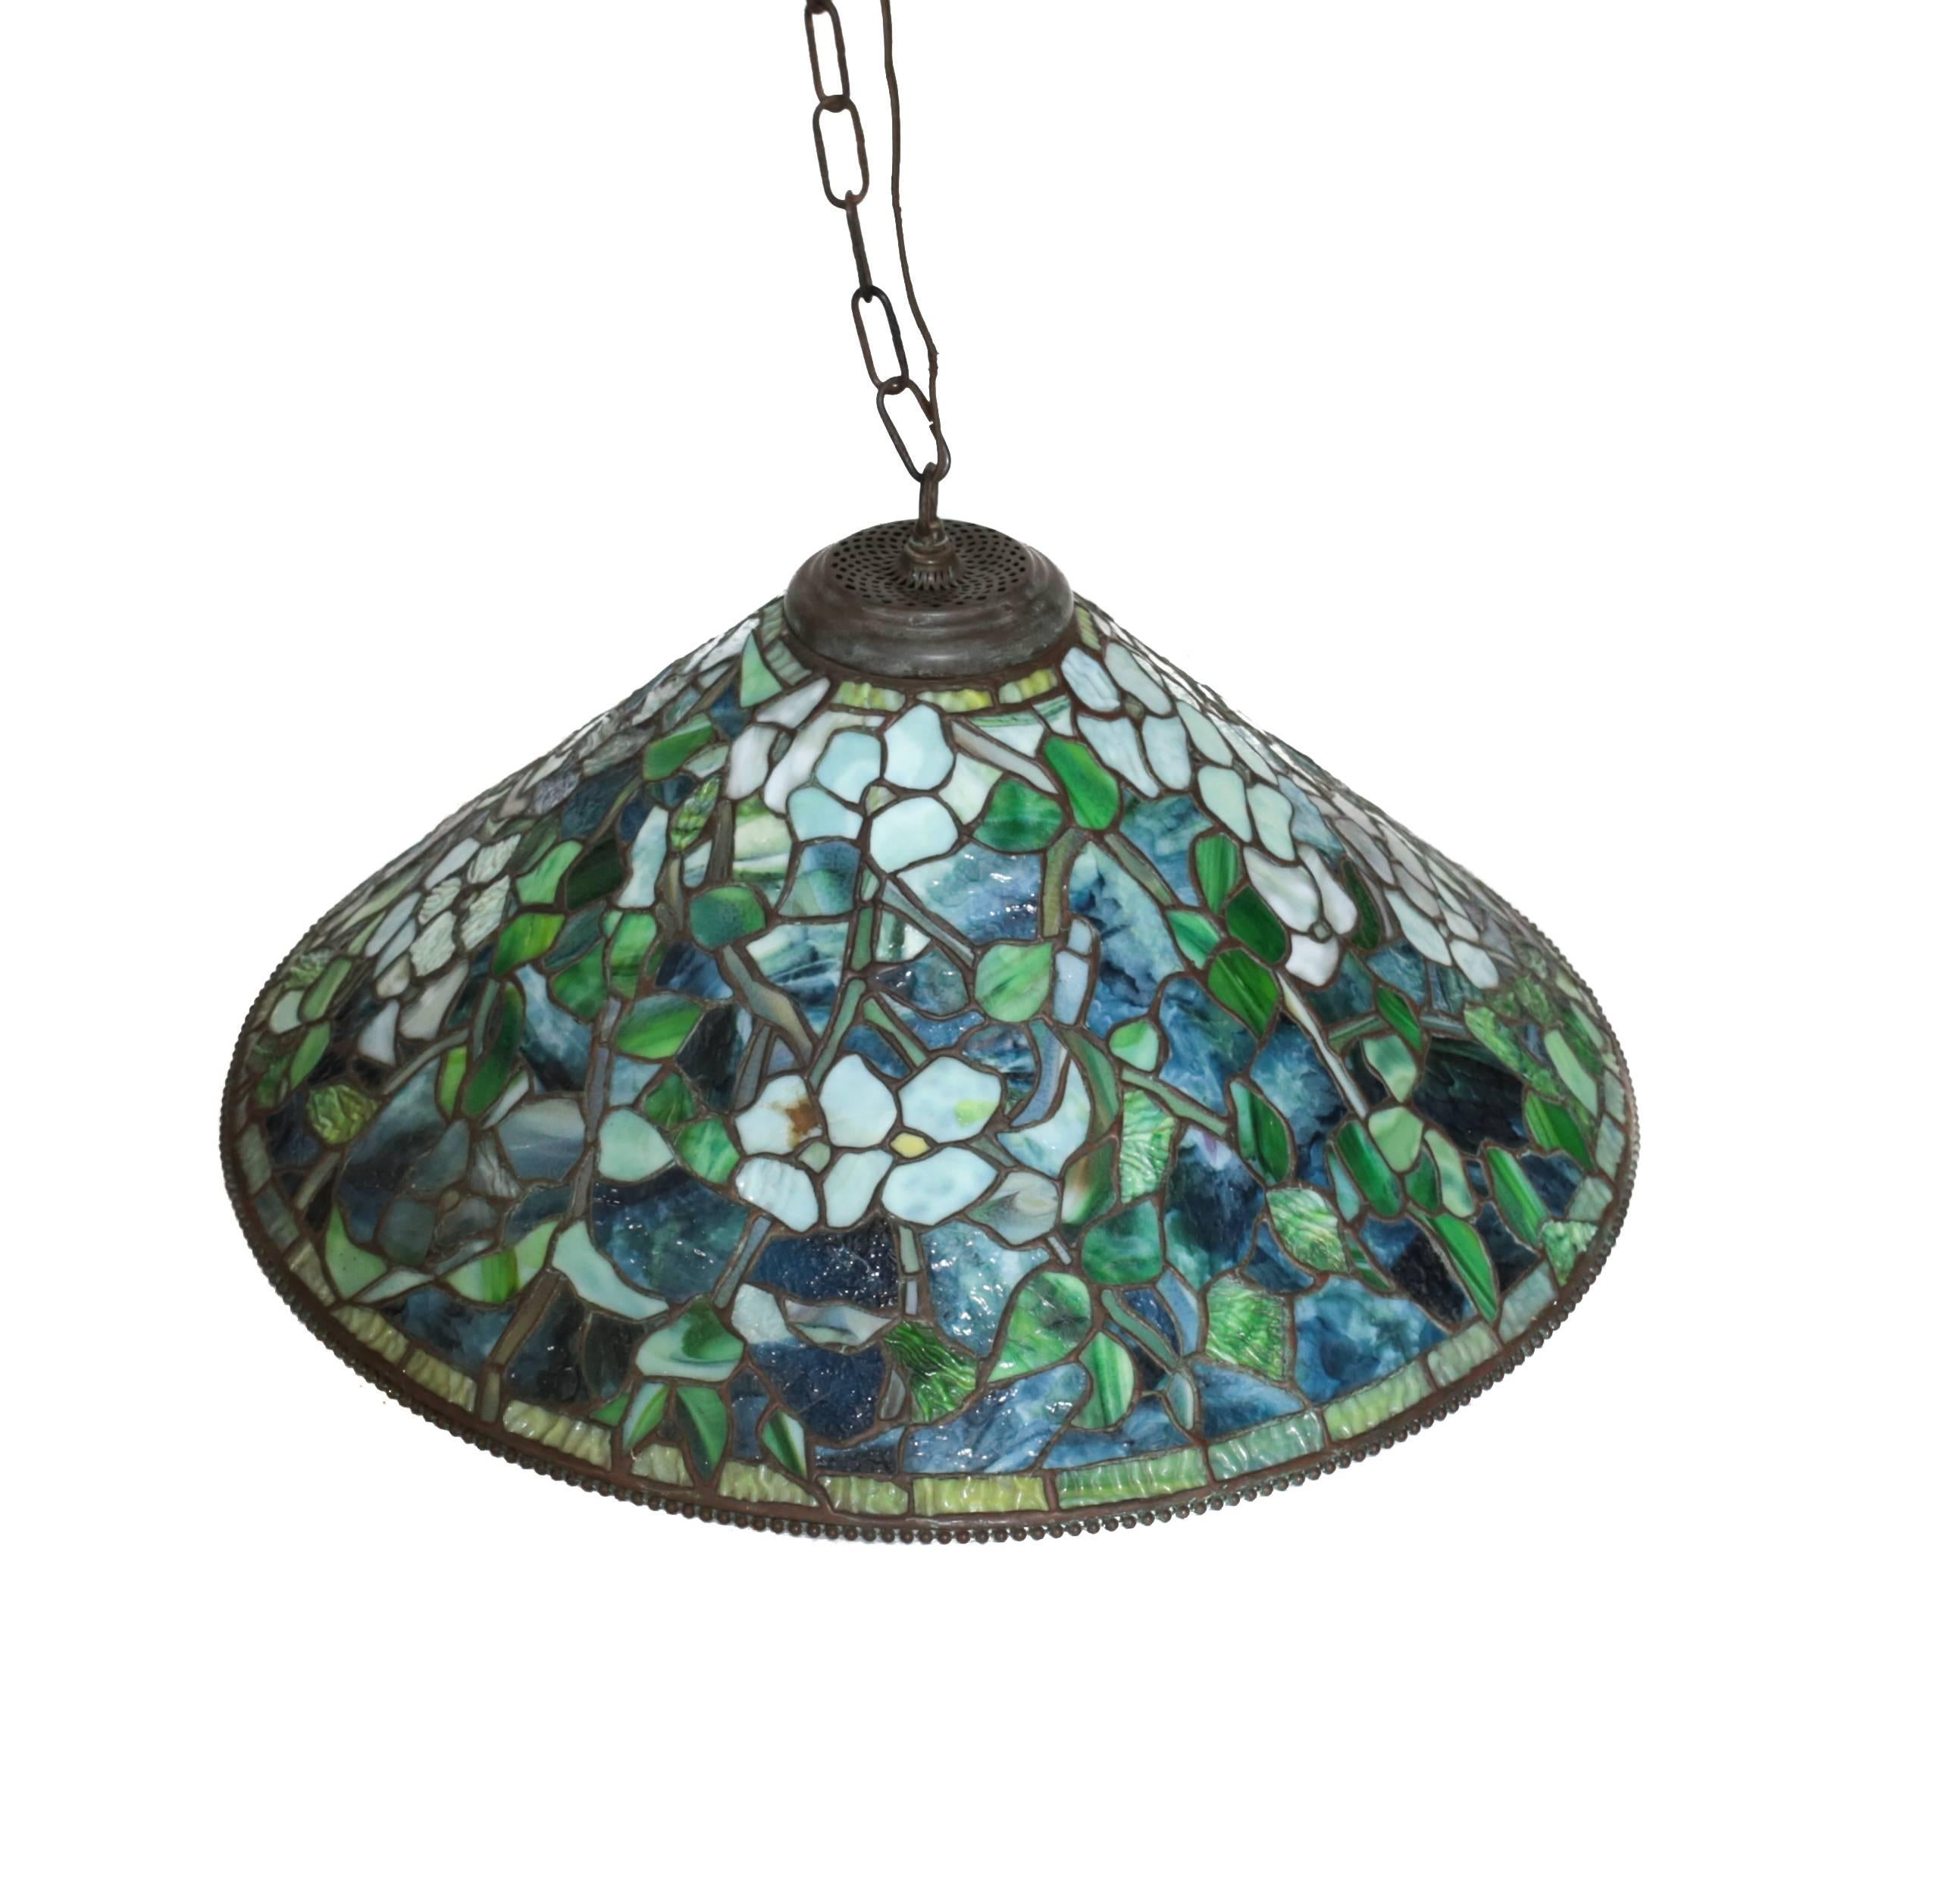 American Tiffany Studios Reproduction Stained Glass Mosaic Chandelier by Paul Crist